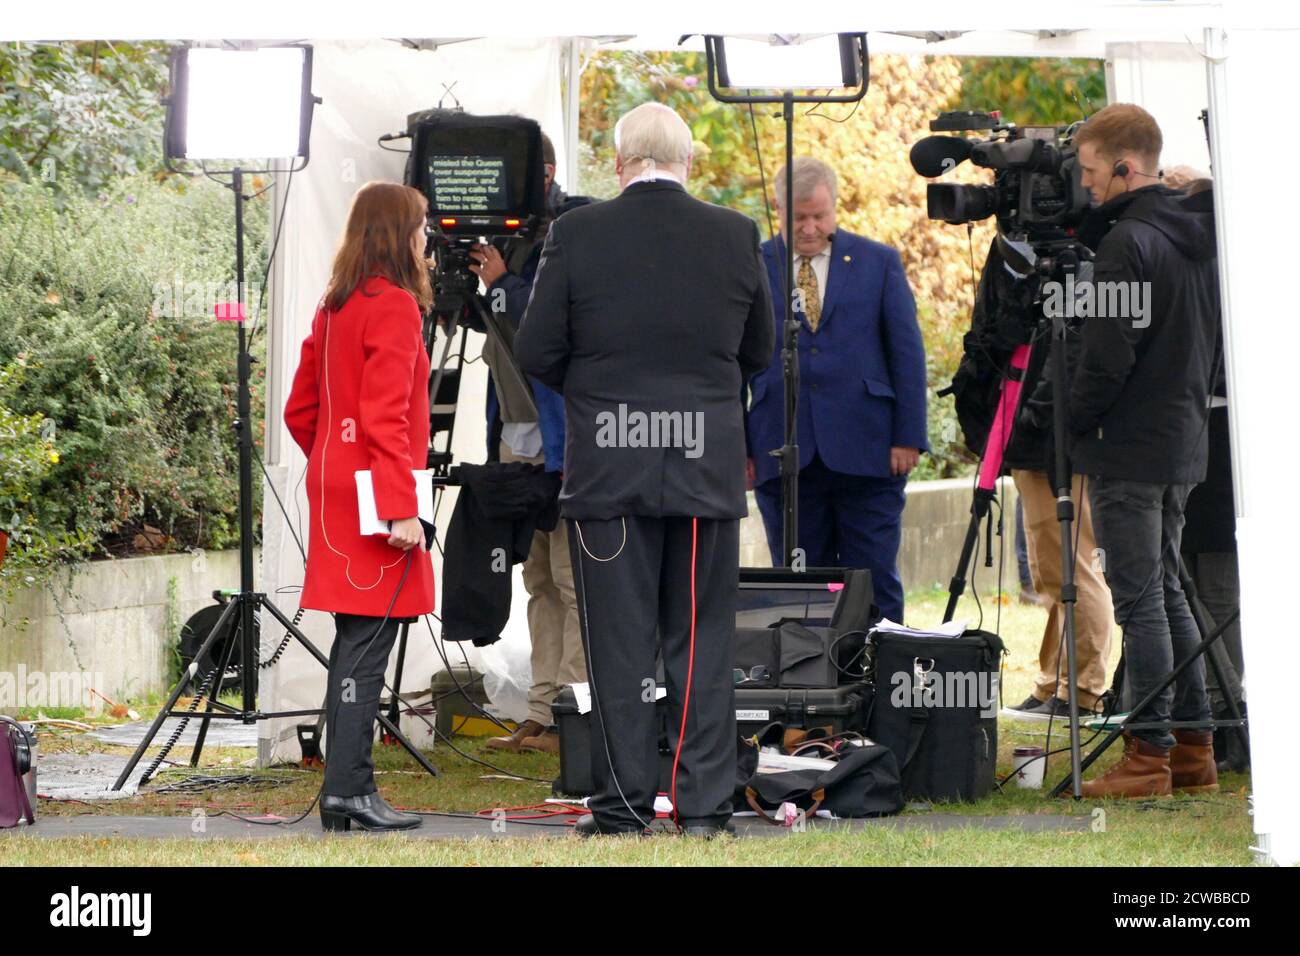 Tamara Cohen (red coat) a Sky News political correspondent prepares for interviews on College Green, Parliament, London. September 2019 Stock Photo